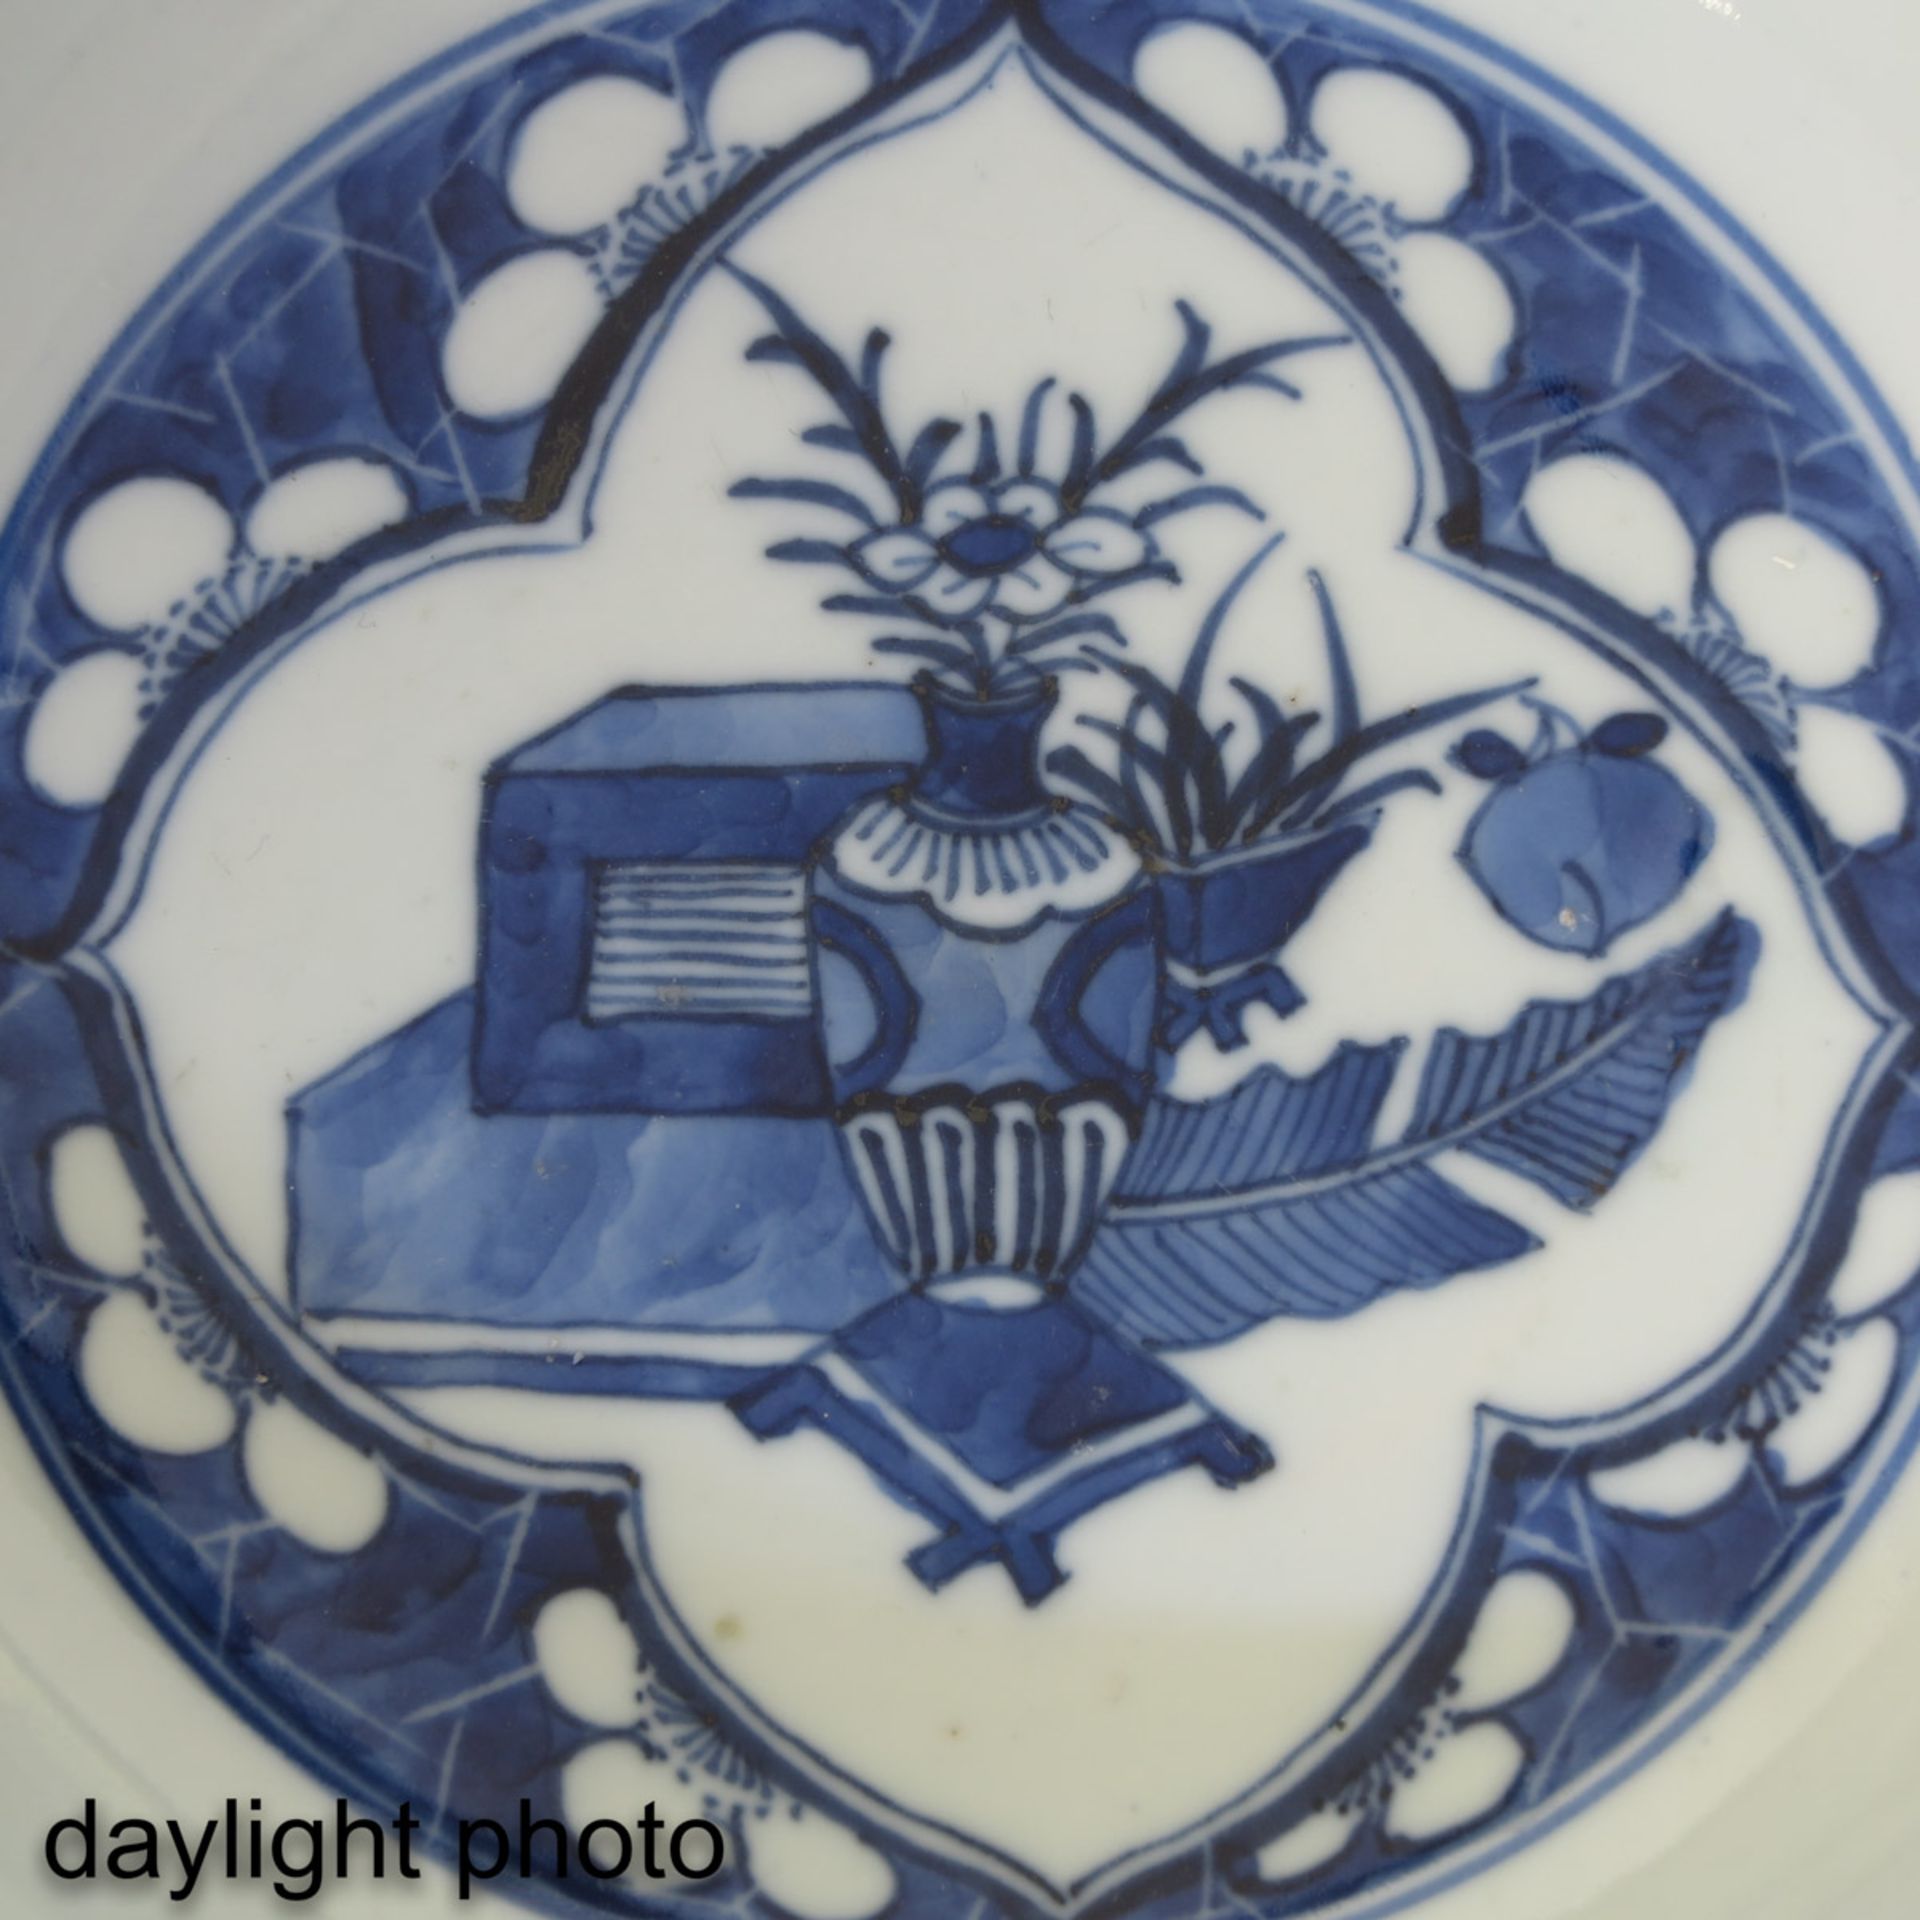 A Blue and White Bowl - Image 10 of 10